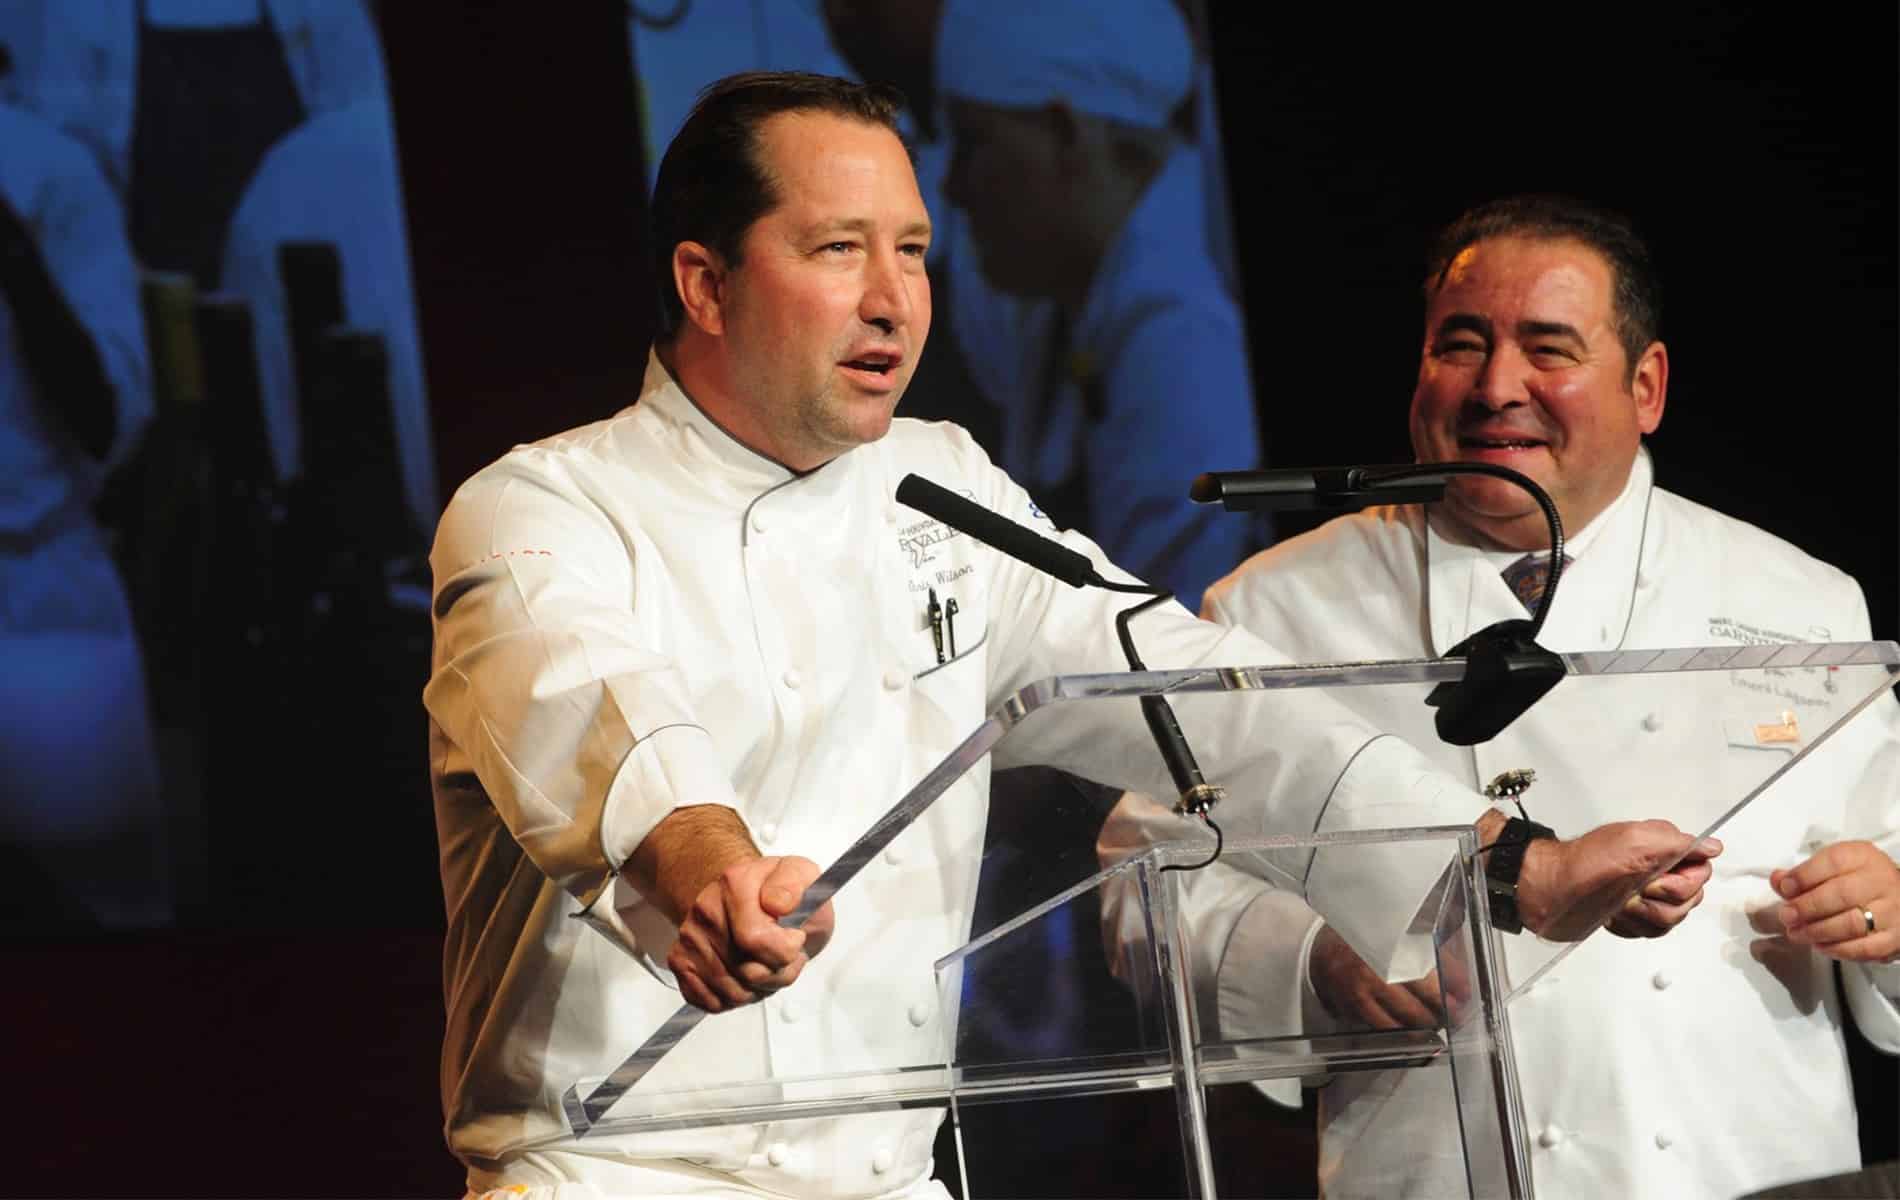 Male chef and Emeril Lagasse speak with guests at the Emeril Lagasse Foundation’ Carnivale du Vin gala and charity wine auction